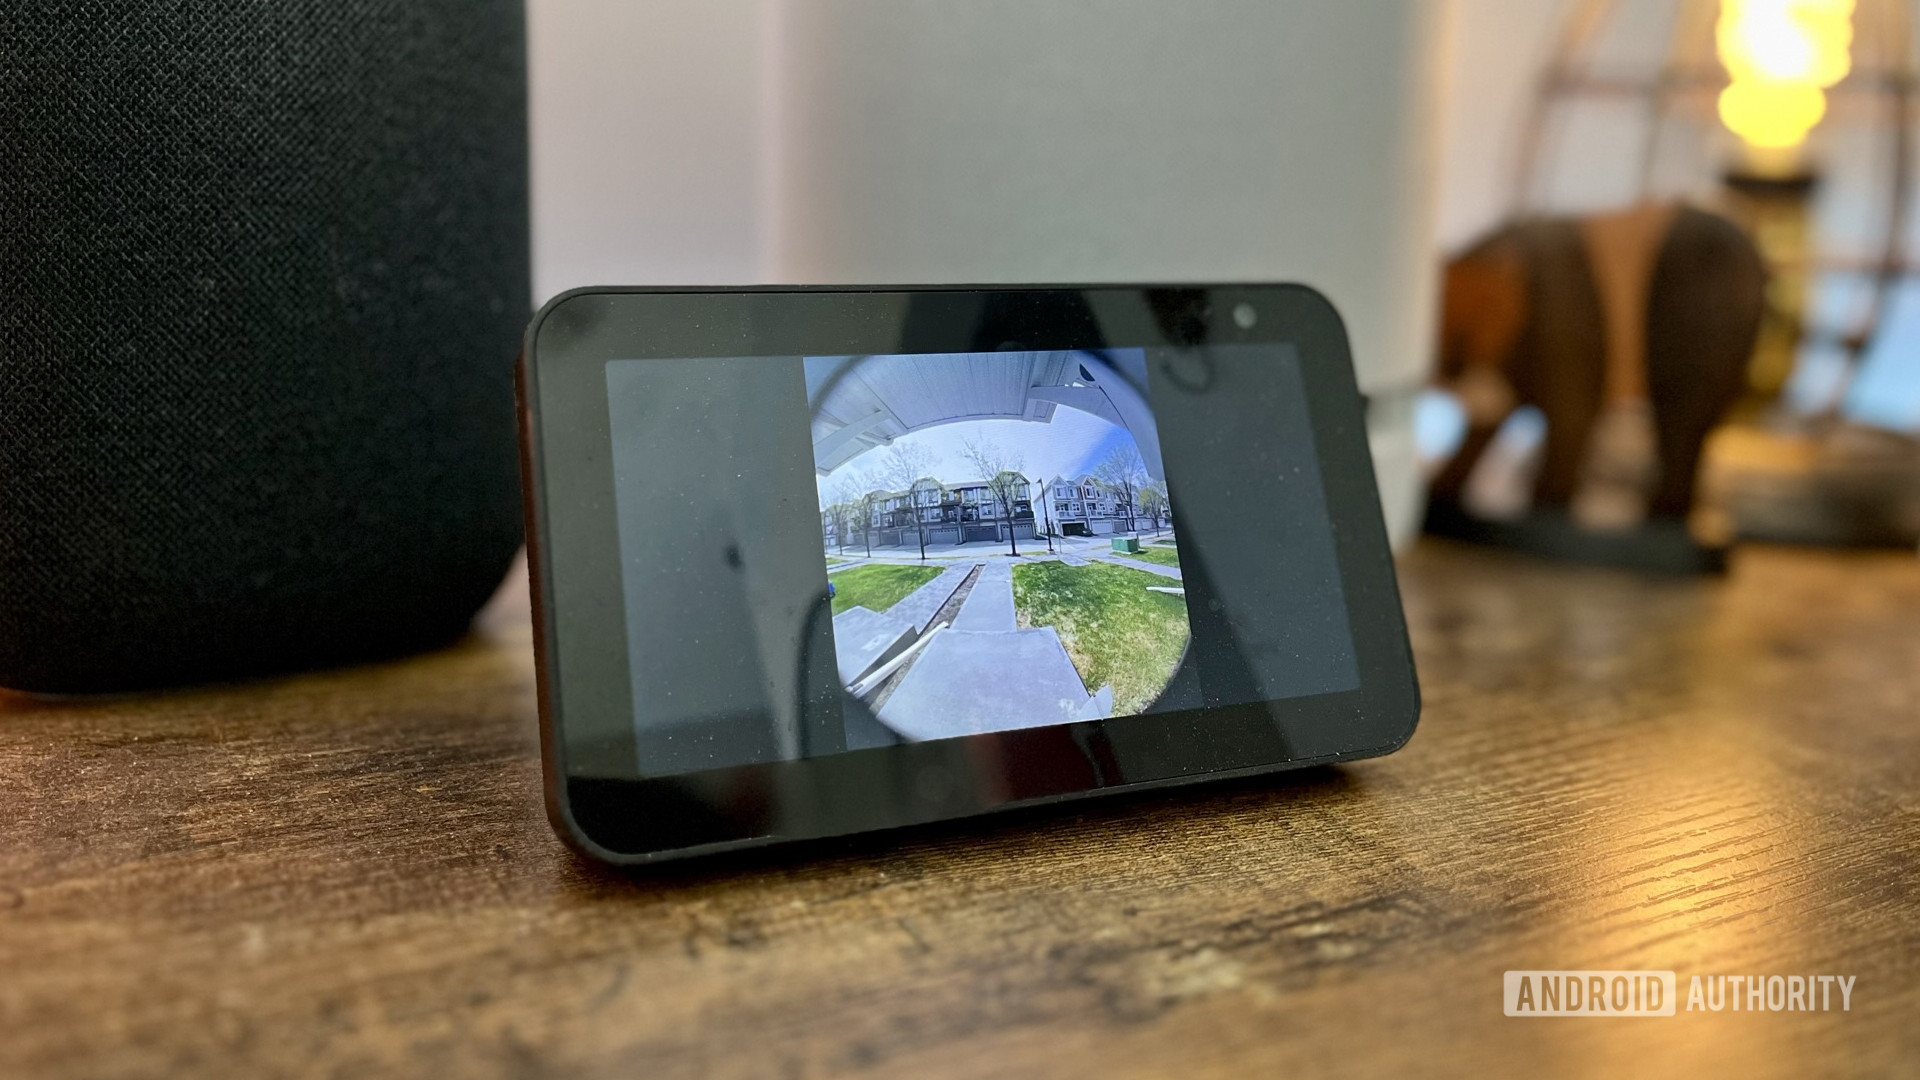 The Ring Battery Doorbell Plus viewed on an Echo Show 5